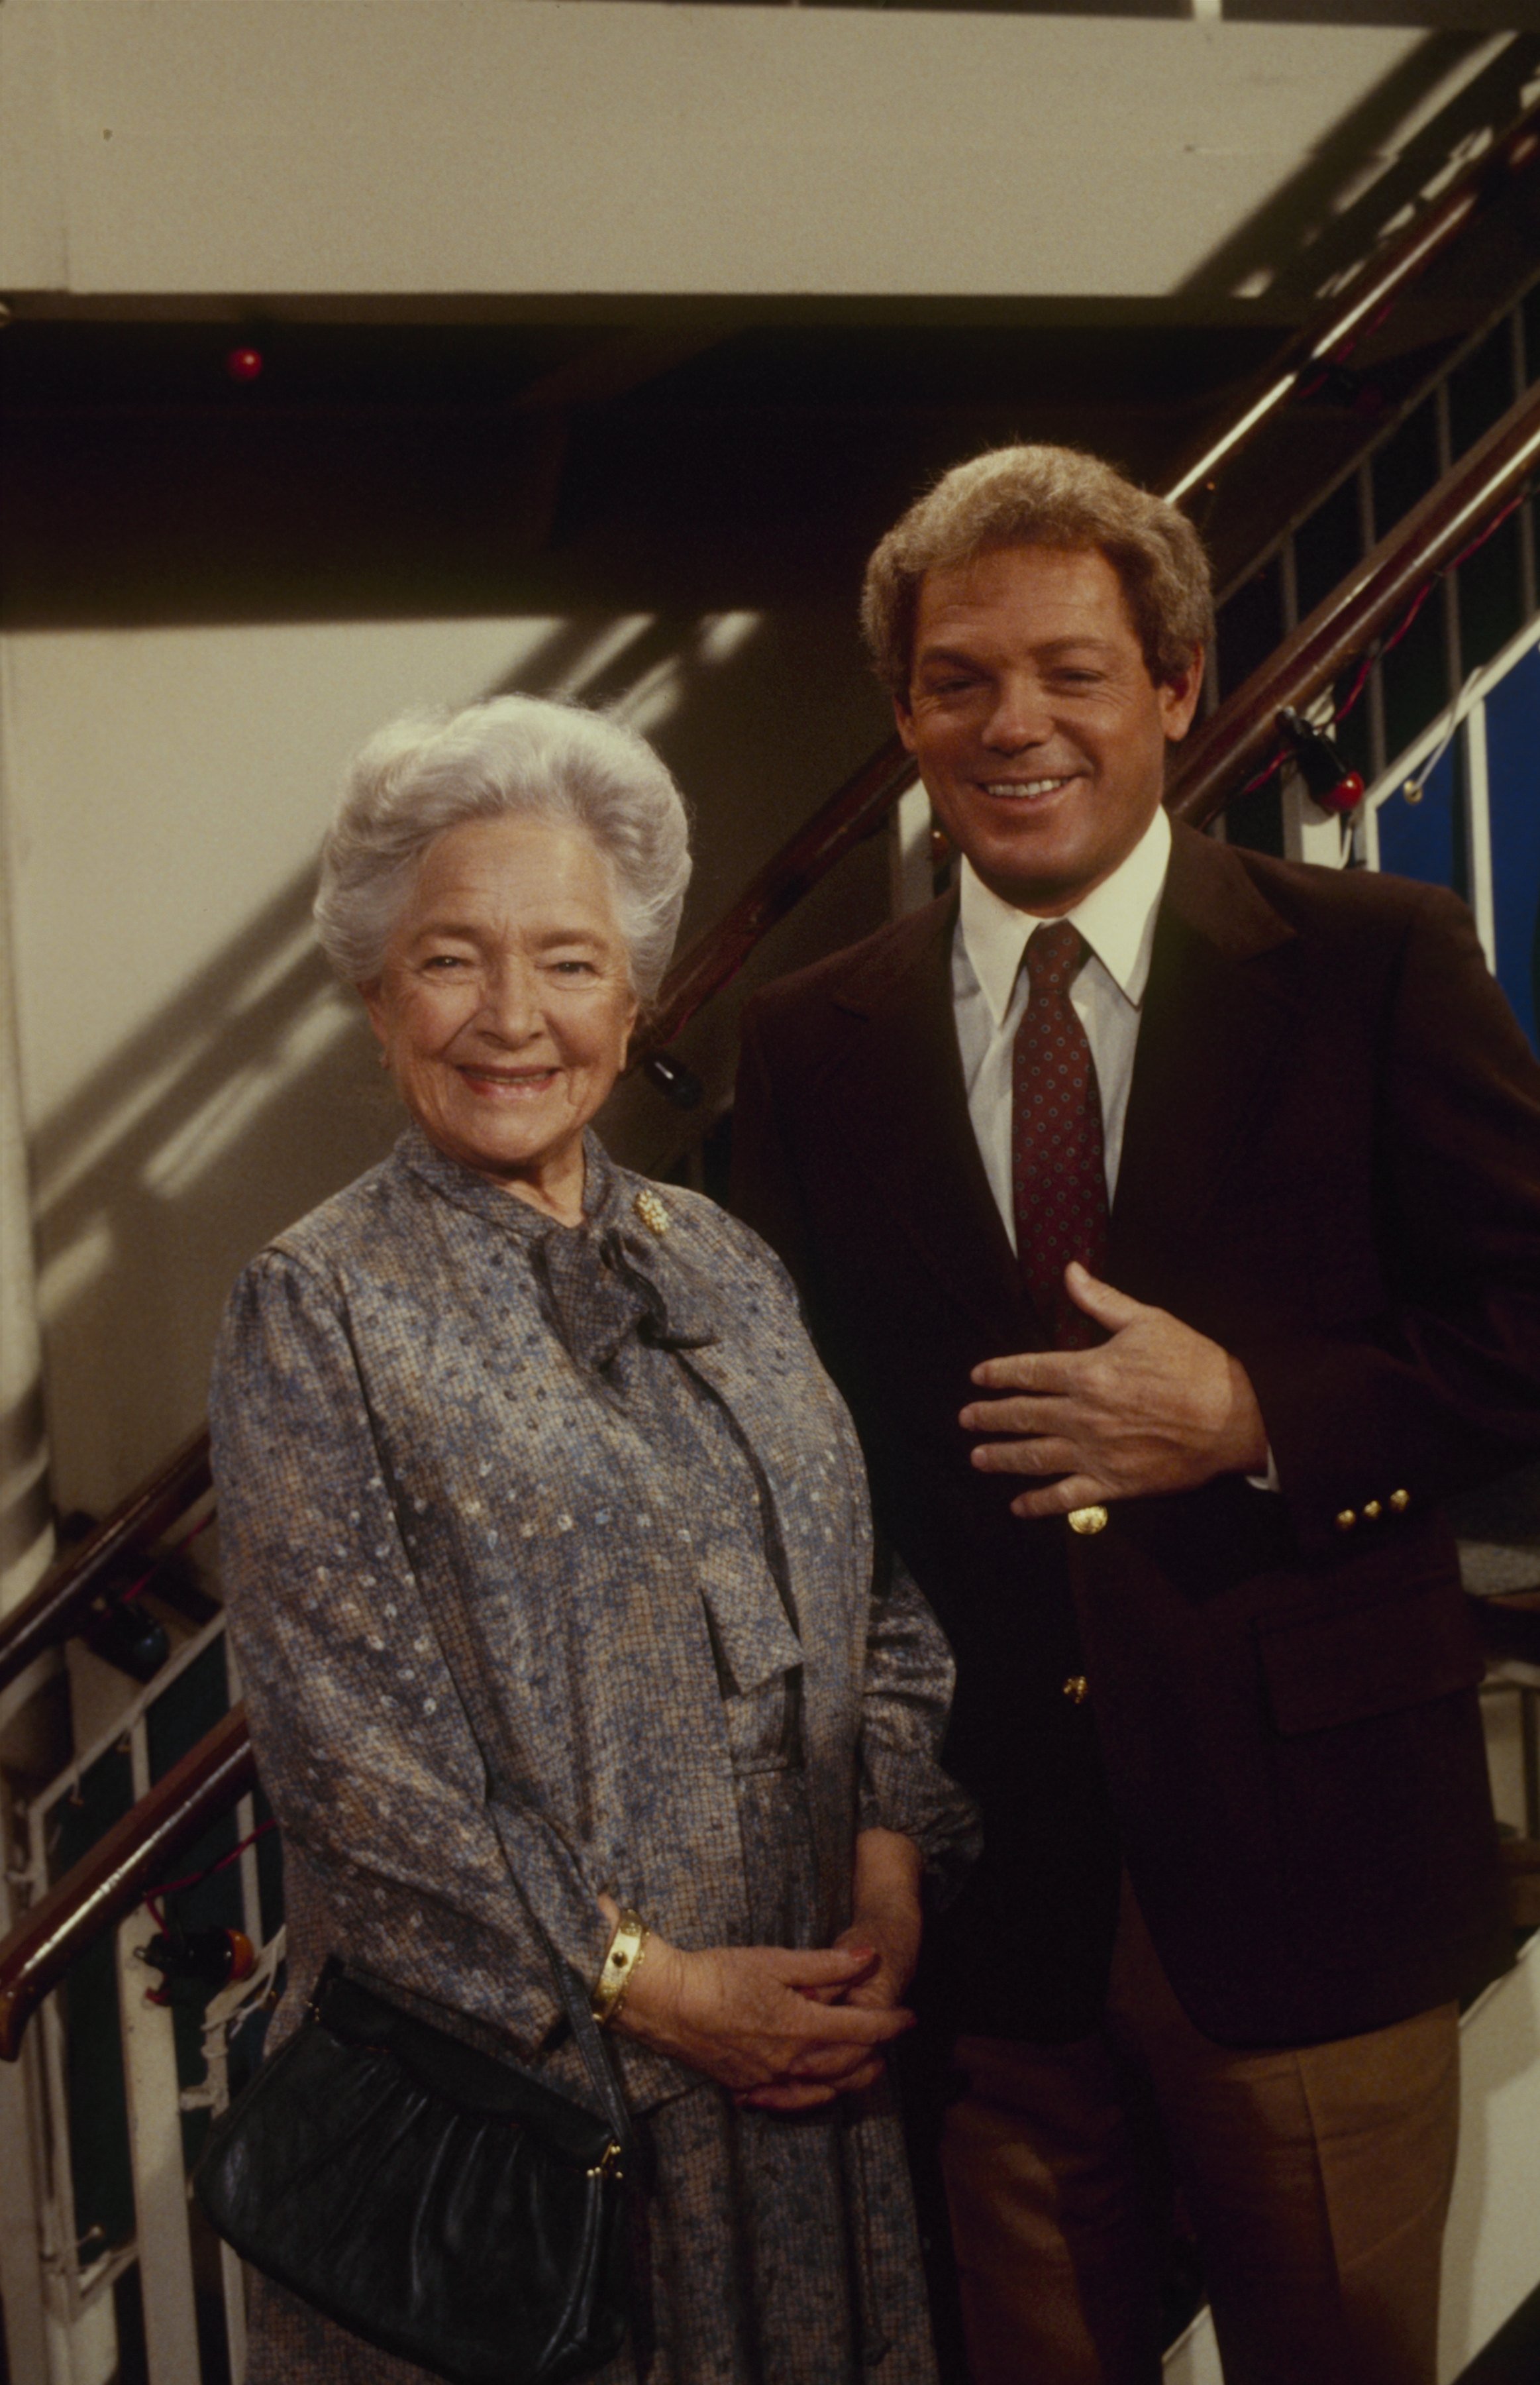 James MacArthur and Helen Hayes on the set of "The Love Boat," which aired on May 5, 1980 | Source: Getty Images